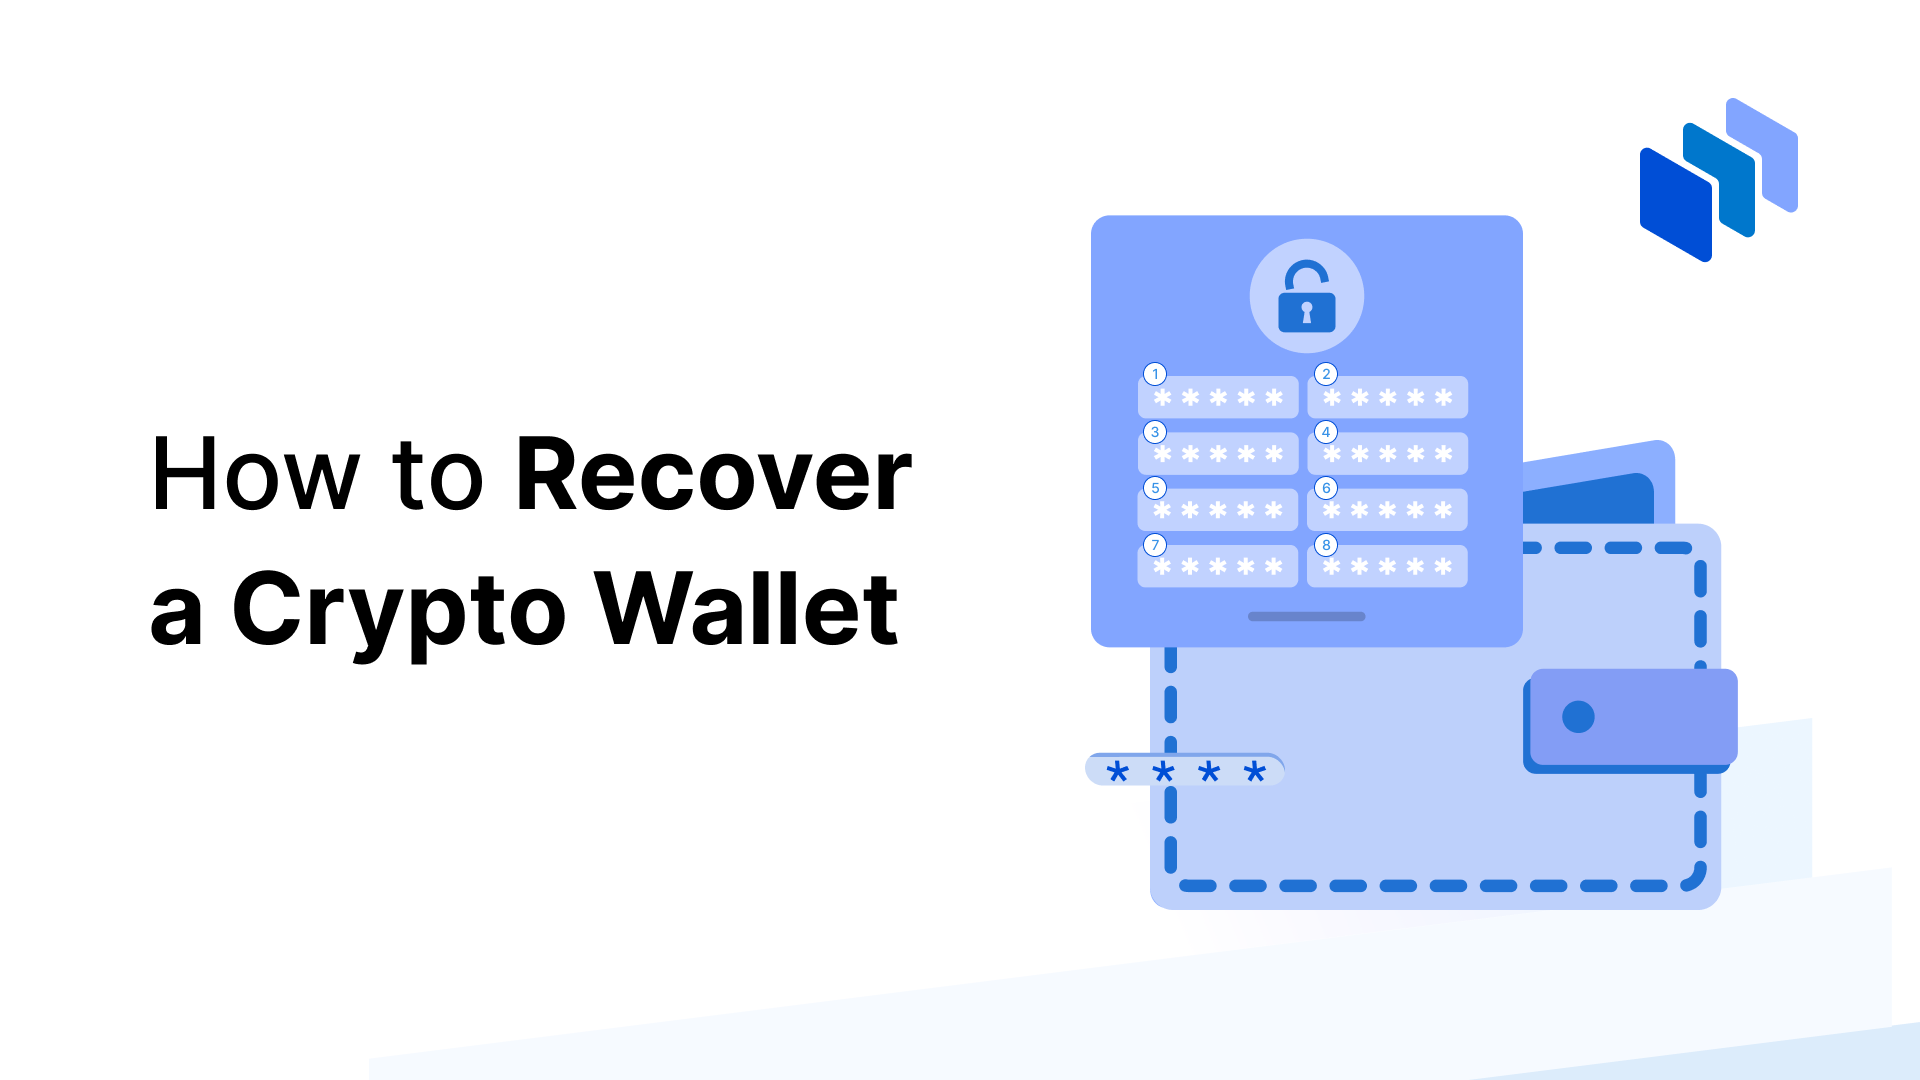 How to Find and Recover Lost Bitcoin Wallets | Ledger